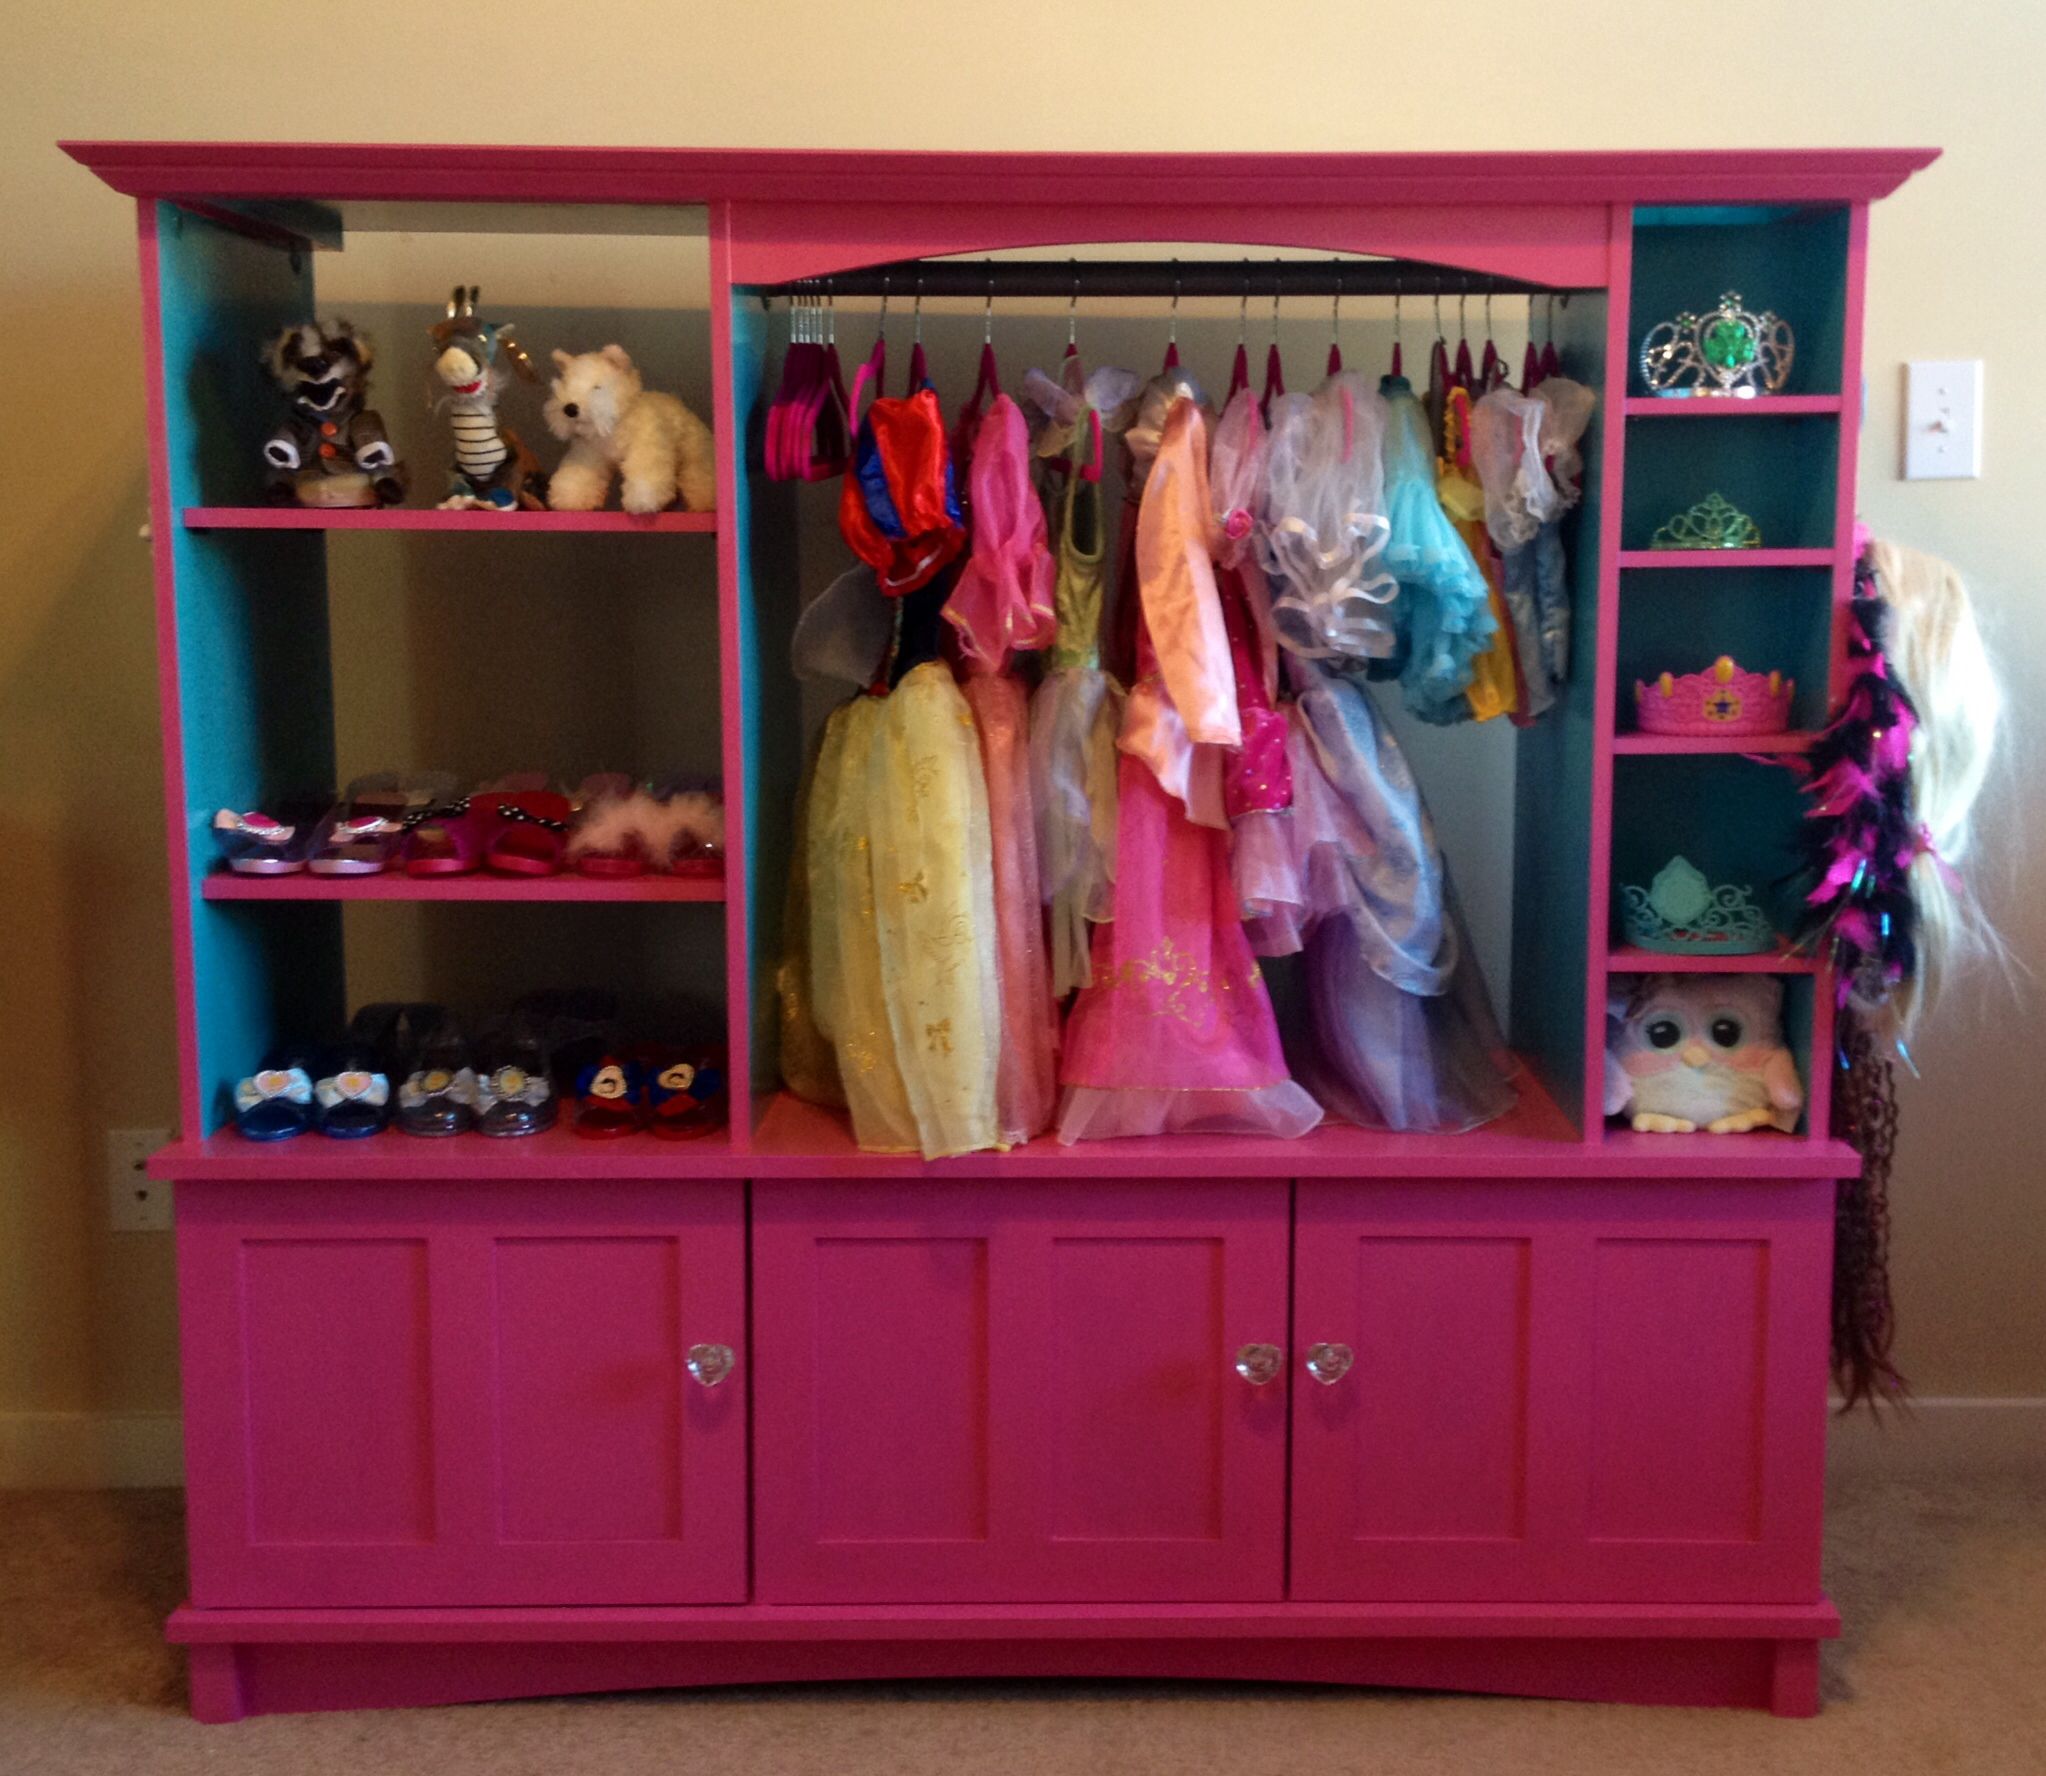 Dress Up Closet Made Out Of An Old Entertainment Center Abbeys Throughout Kids Dress Up Wardrobe Closet (View 7 of 25)